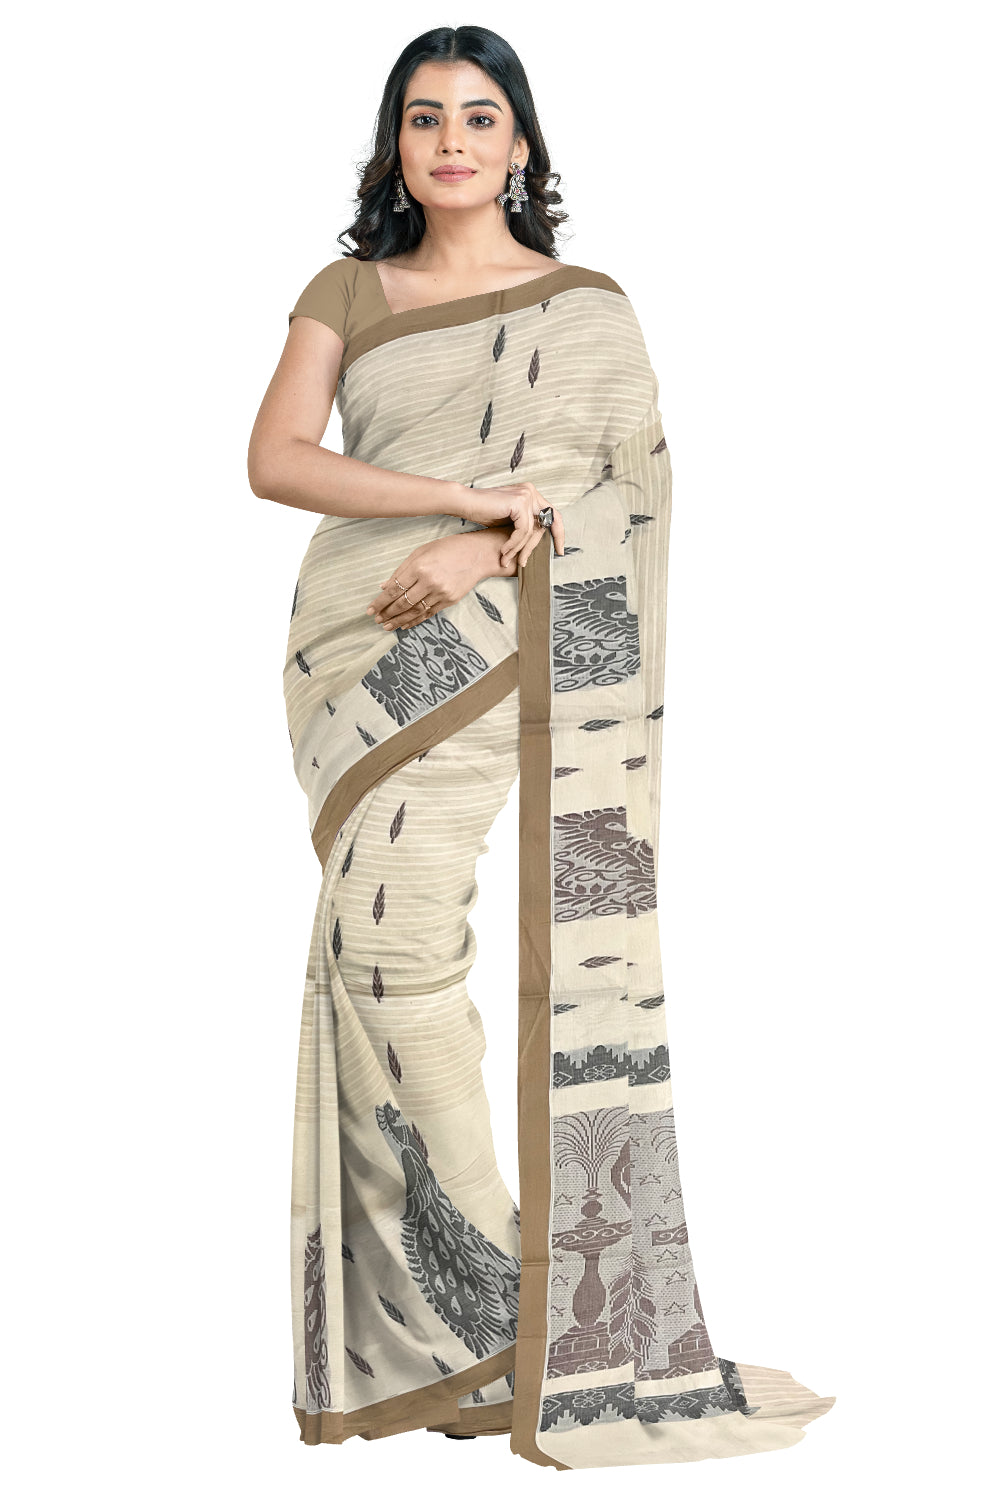 Southloom Light Brown Cotton Saree with Peacock Woven Designs